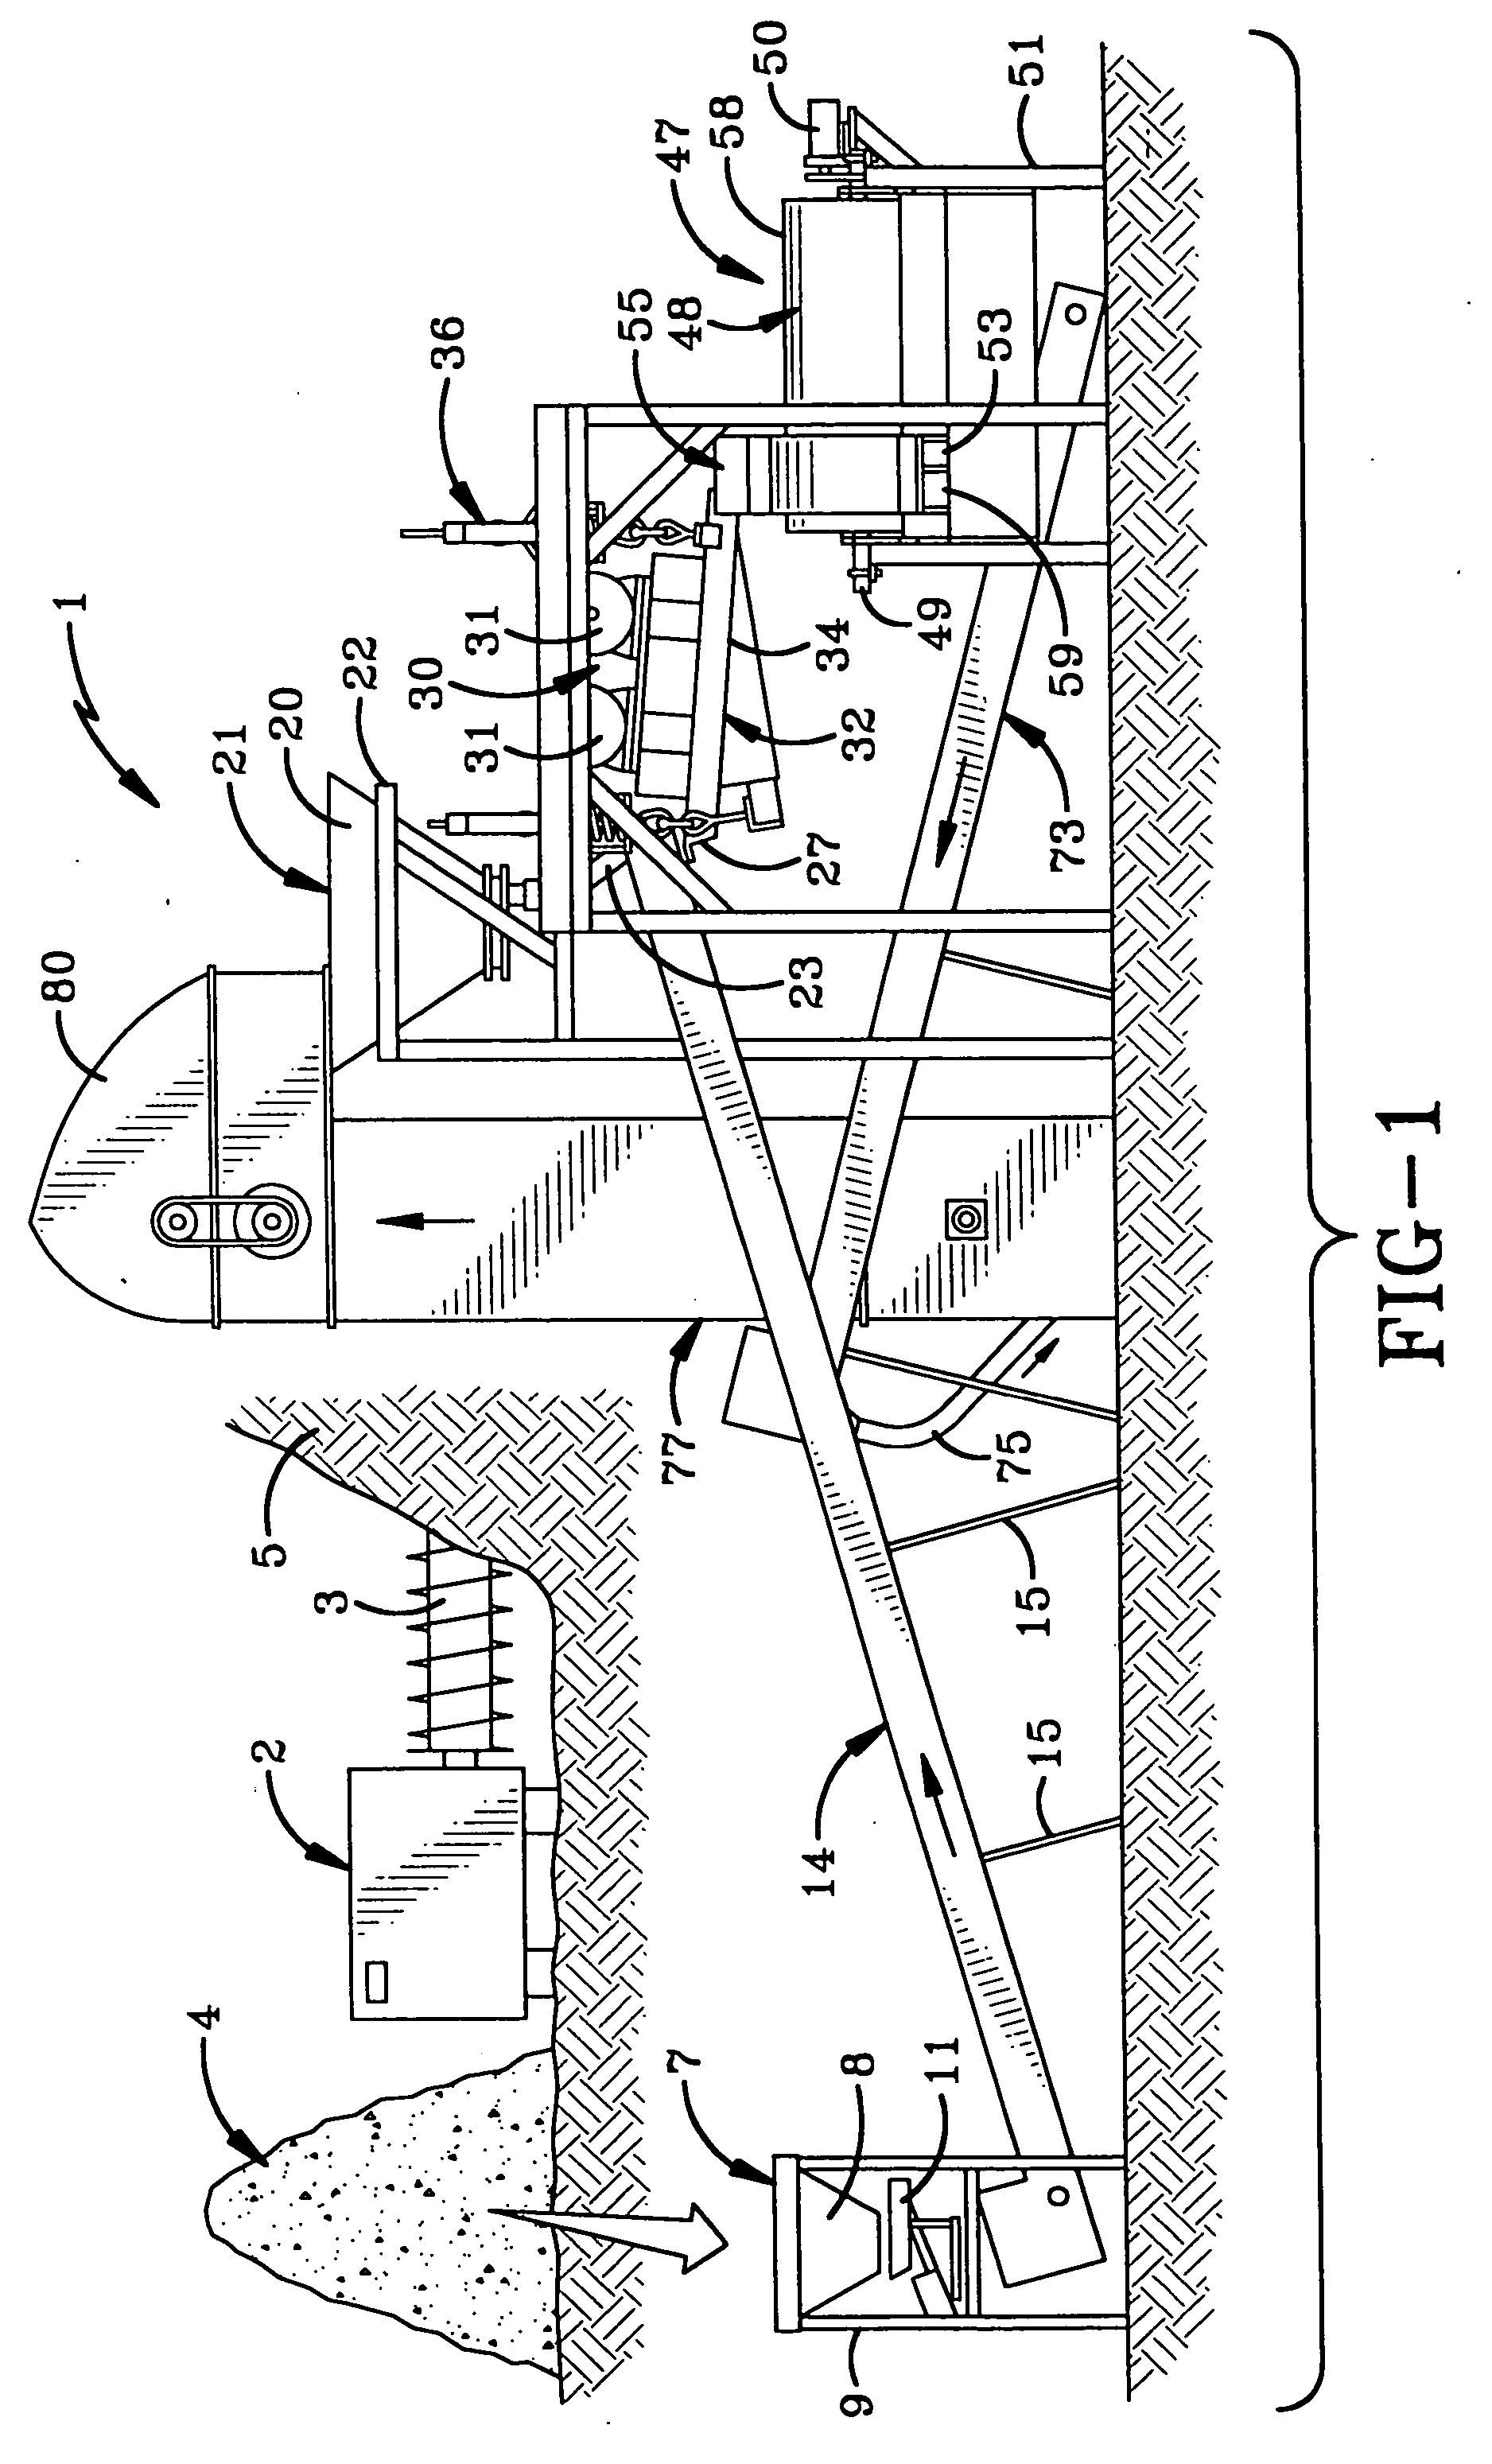 Method and apparatus for cleaning coal